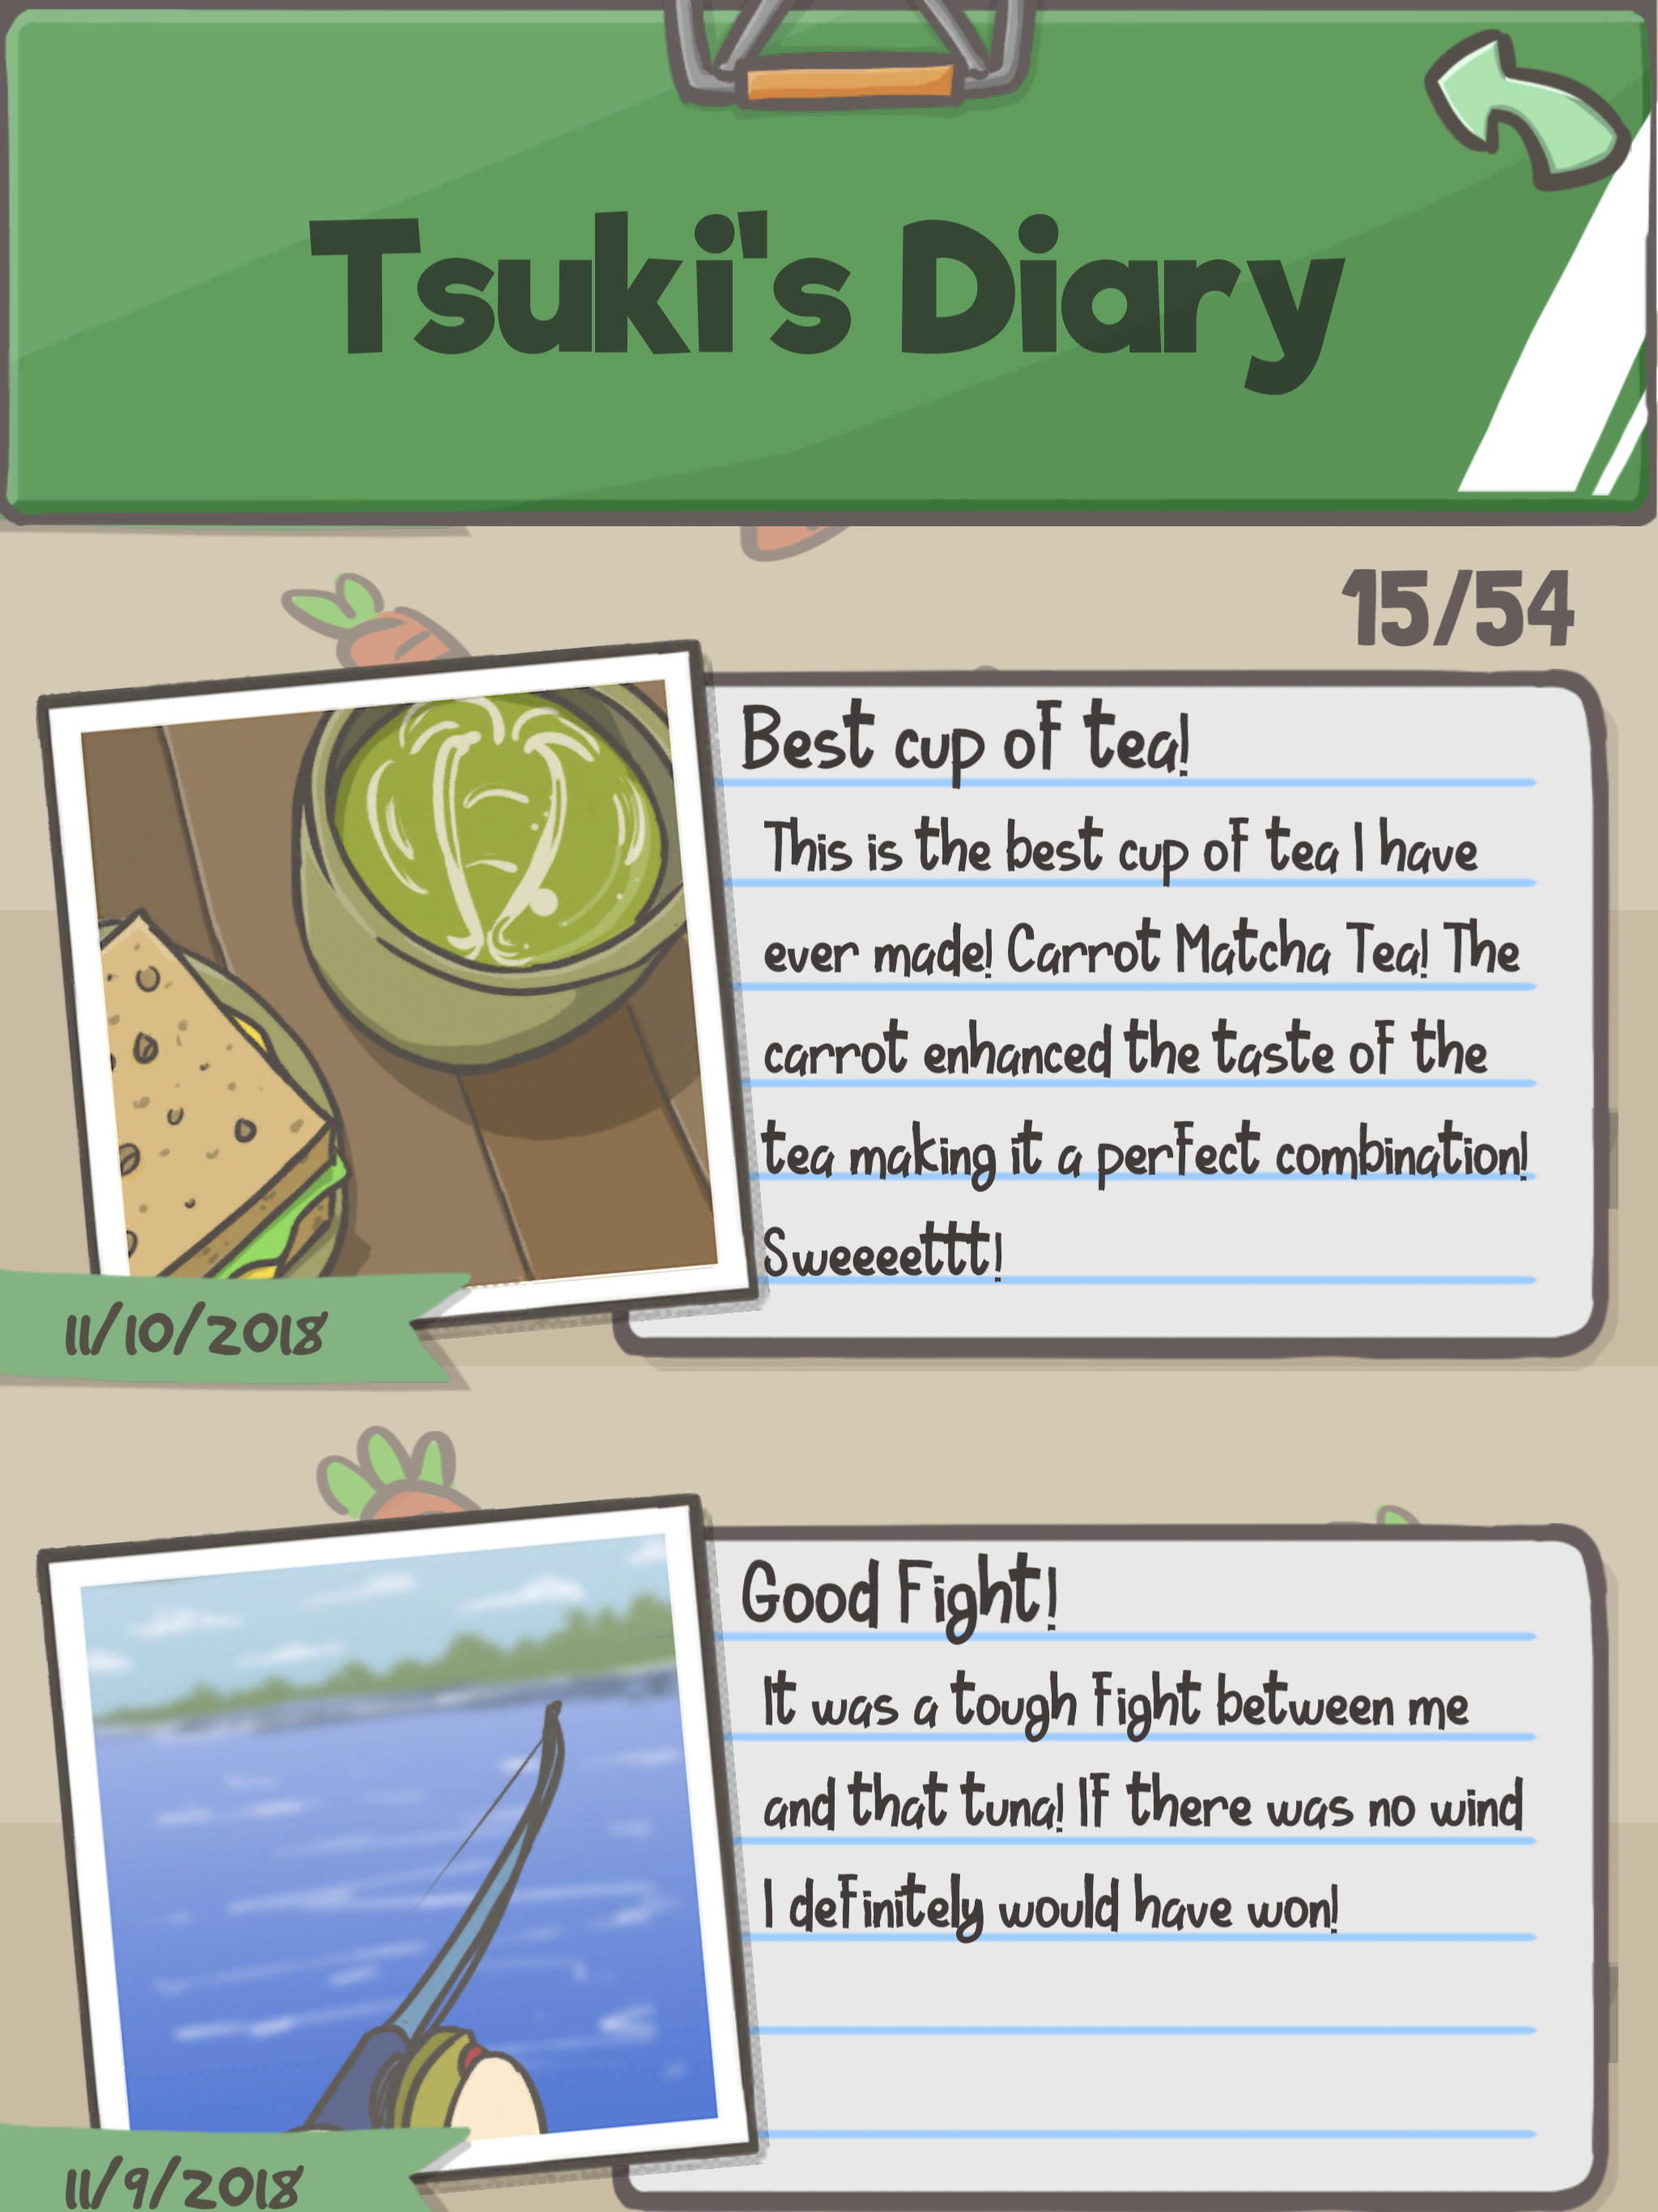 HyperBeard on X: The new update for #TsukiAdventure is available